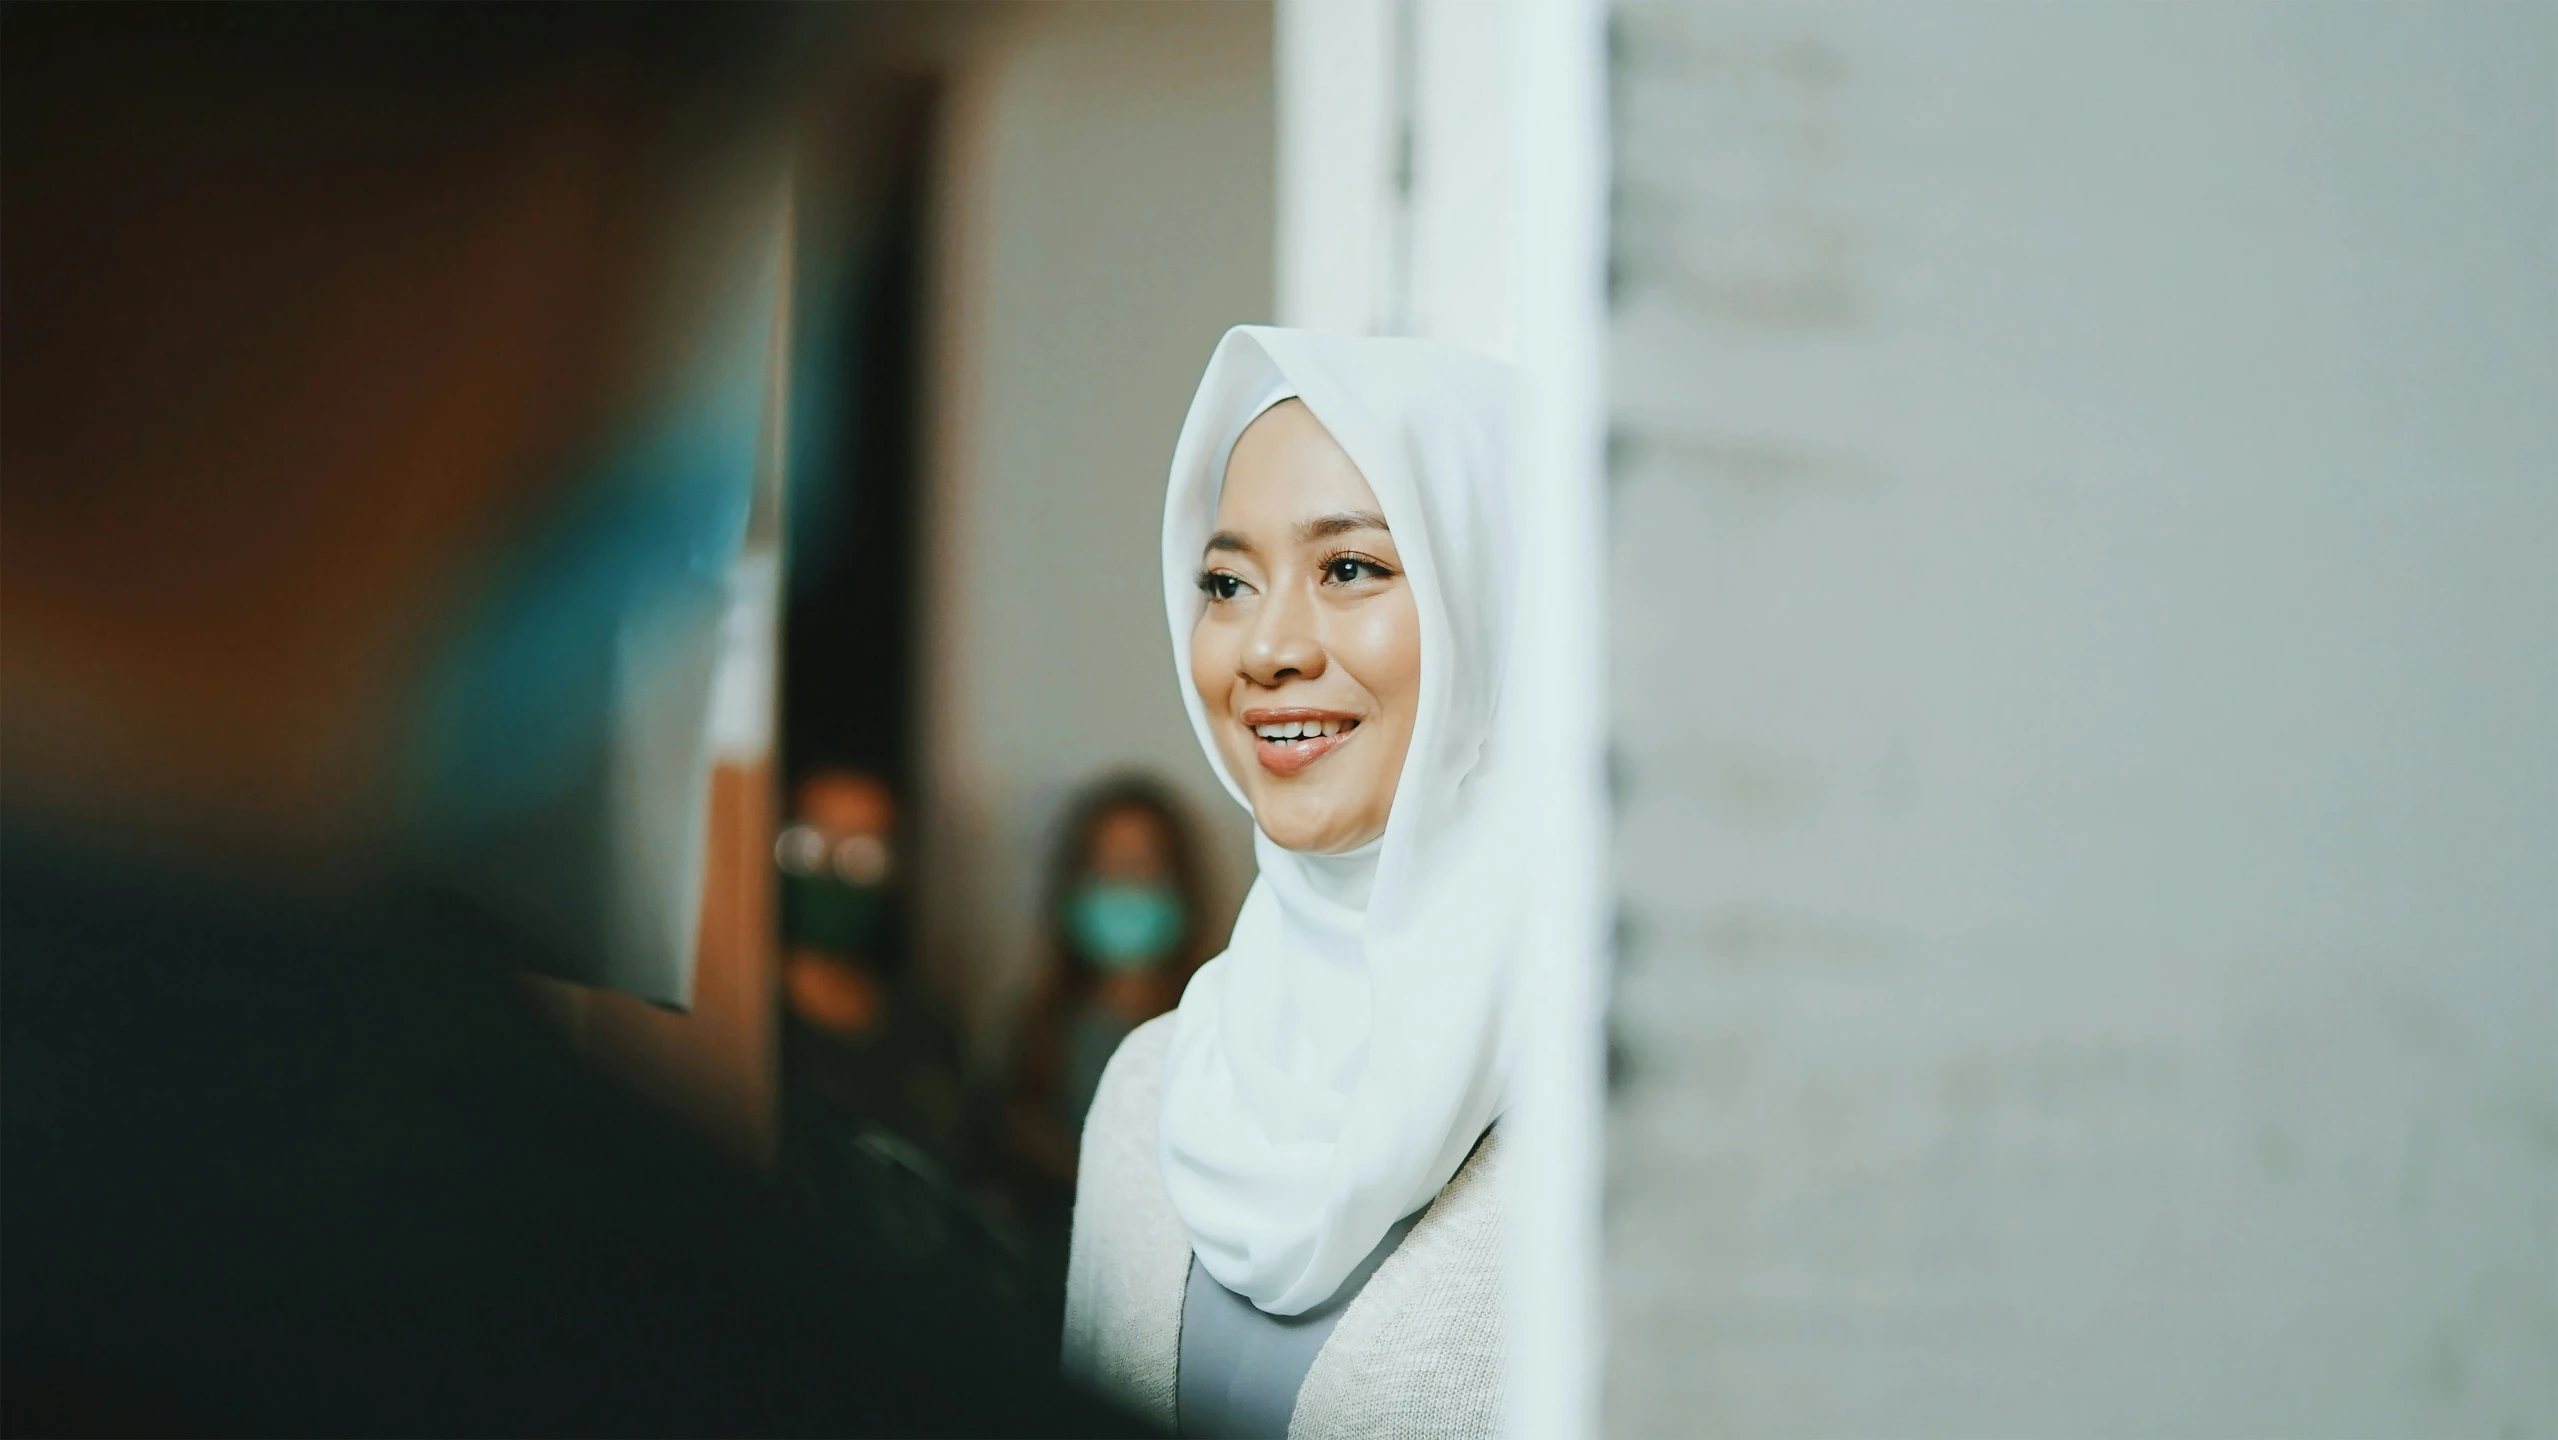 a smiling woman wearing a white headscarf